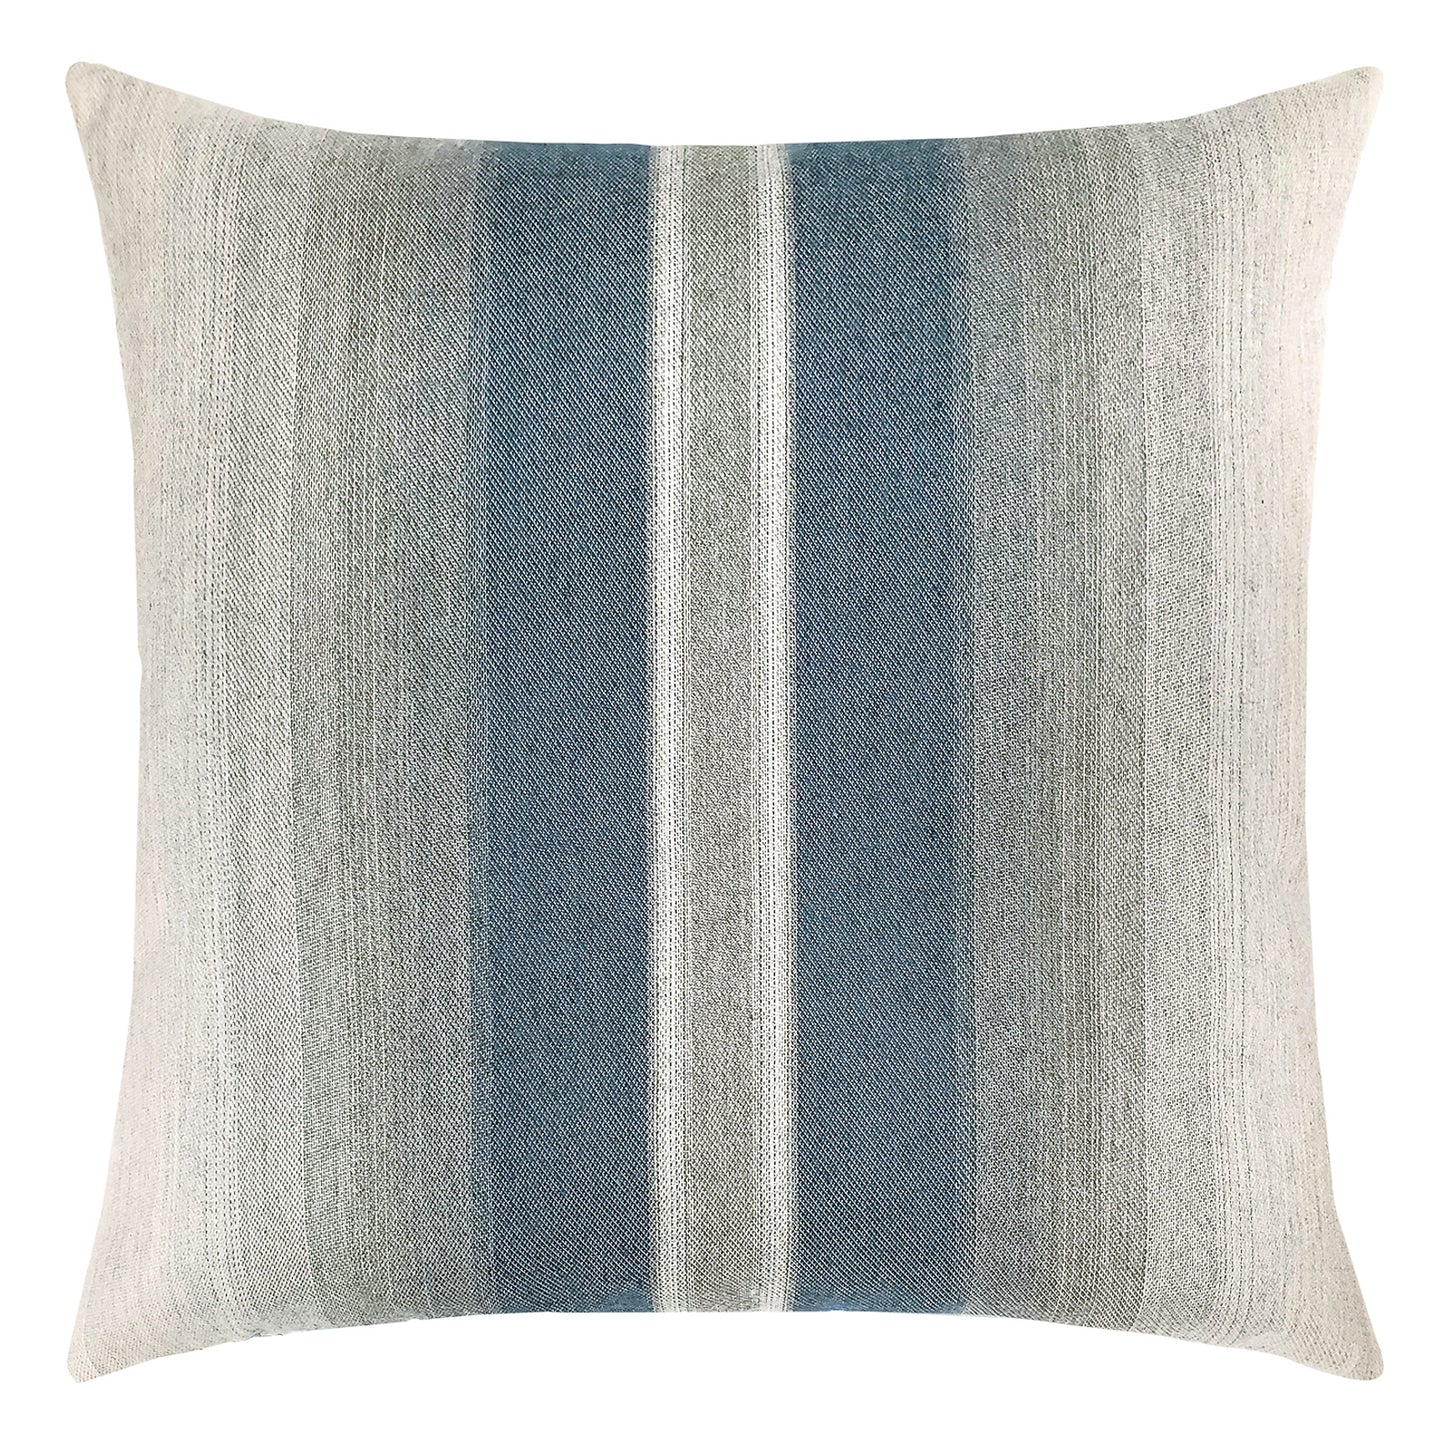 Elaine Smith 22 Square Pillow Ombre Indig, image 1